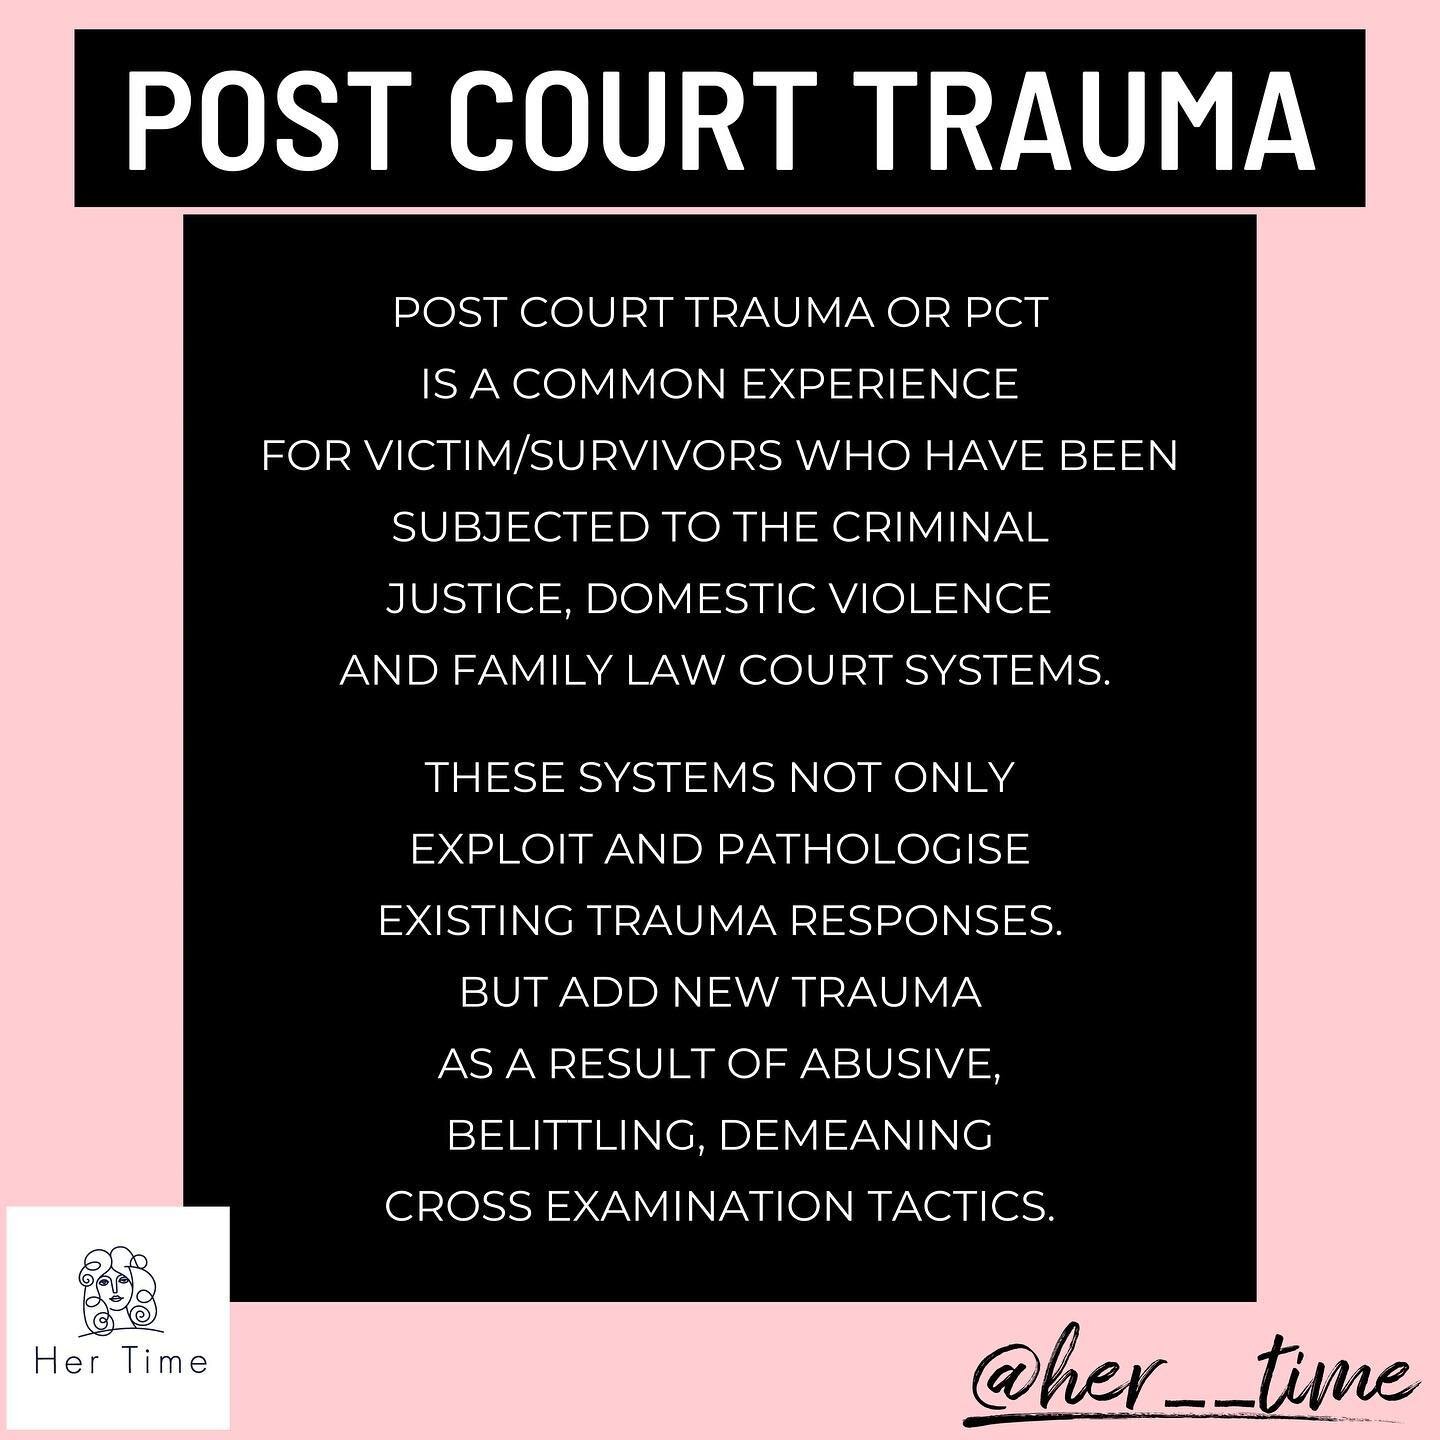 Post Court Trauma is real. 

In sexual assault, domestic violence or family law court matters, very often the victim/survivor experiences are one of pathologising, shaming or exploiting existing trauma responses. 

And then adding to the trauma using